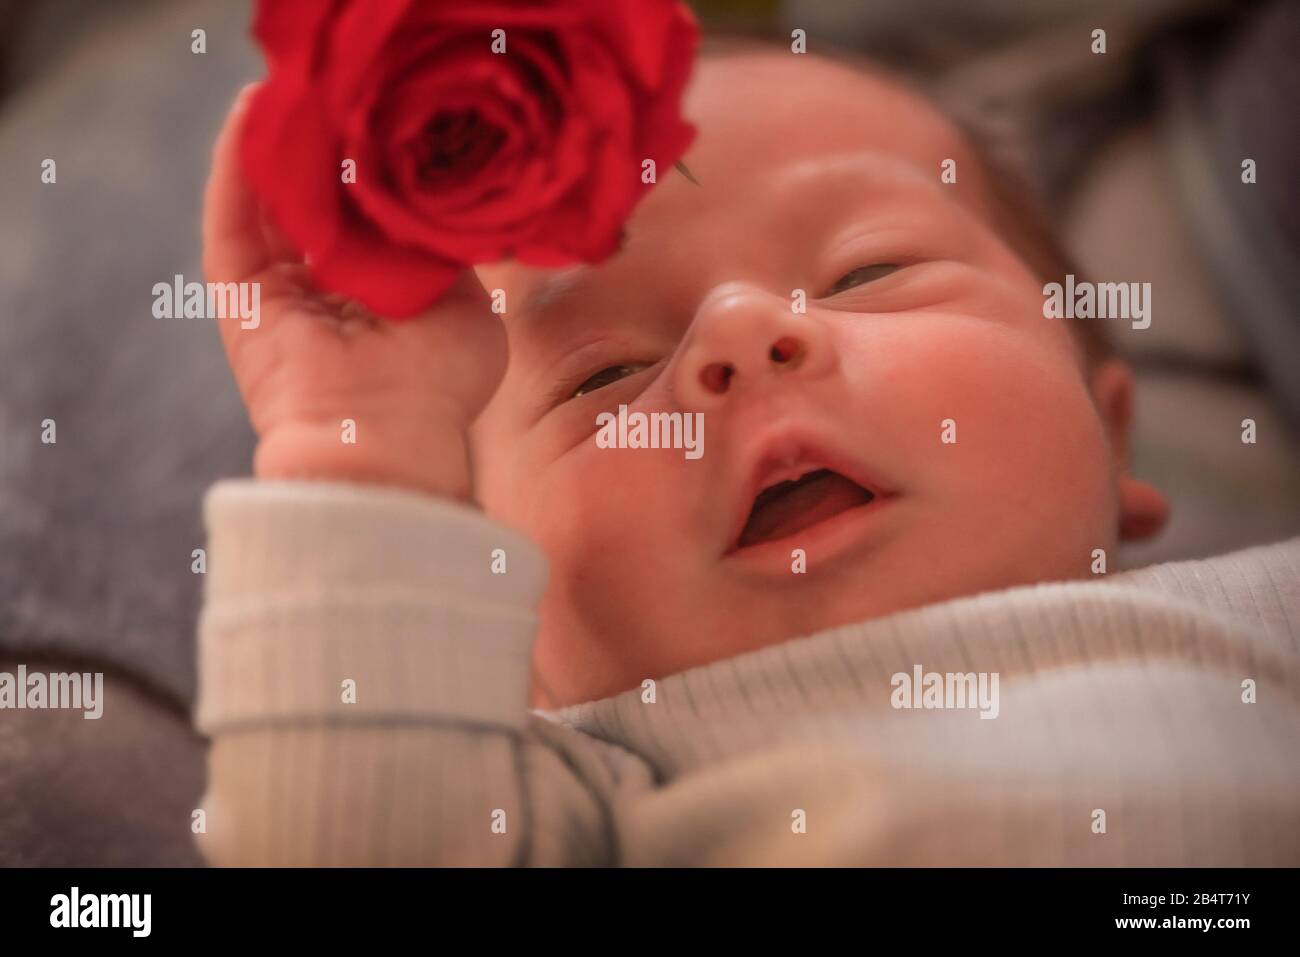 Close up of a newborn baby boy holding a rose in his hand and  laying in the bed Stock Photo